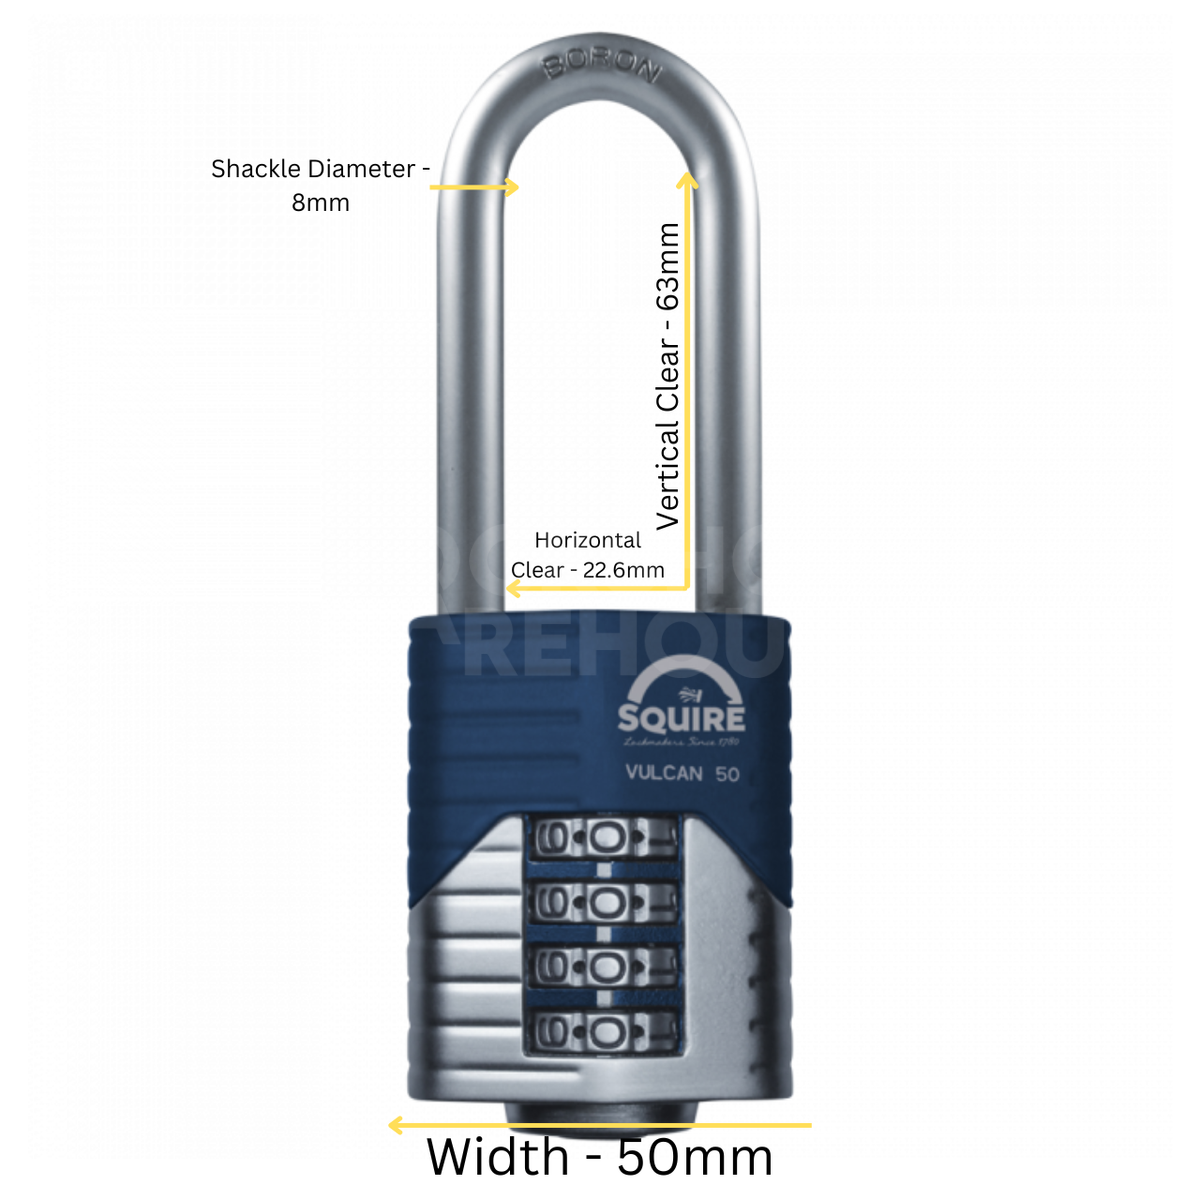 Dimensions Image: SQUIRE Vulcan 50mm 2.5" Long Shackle Combination Padlock - 4 Wheel